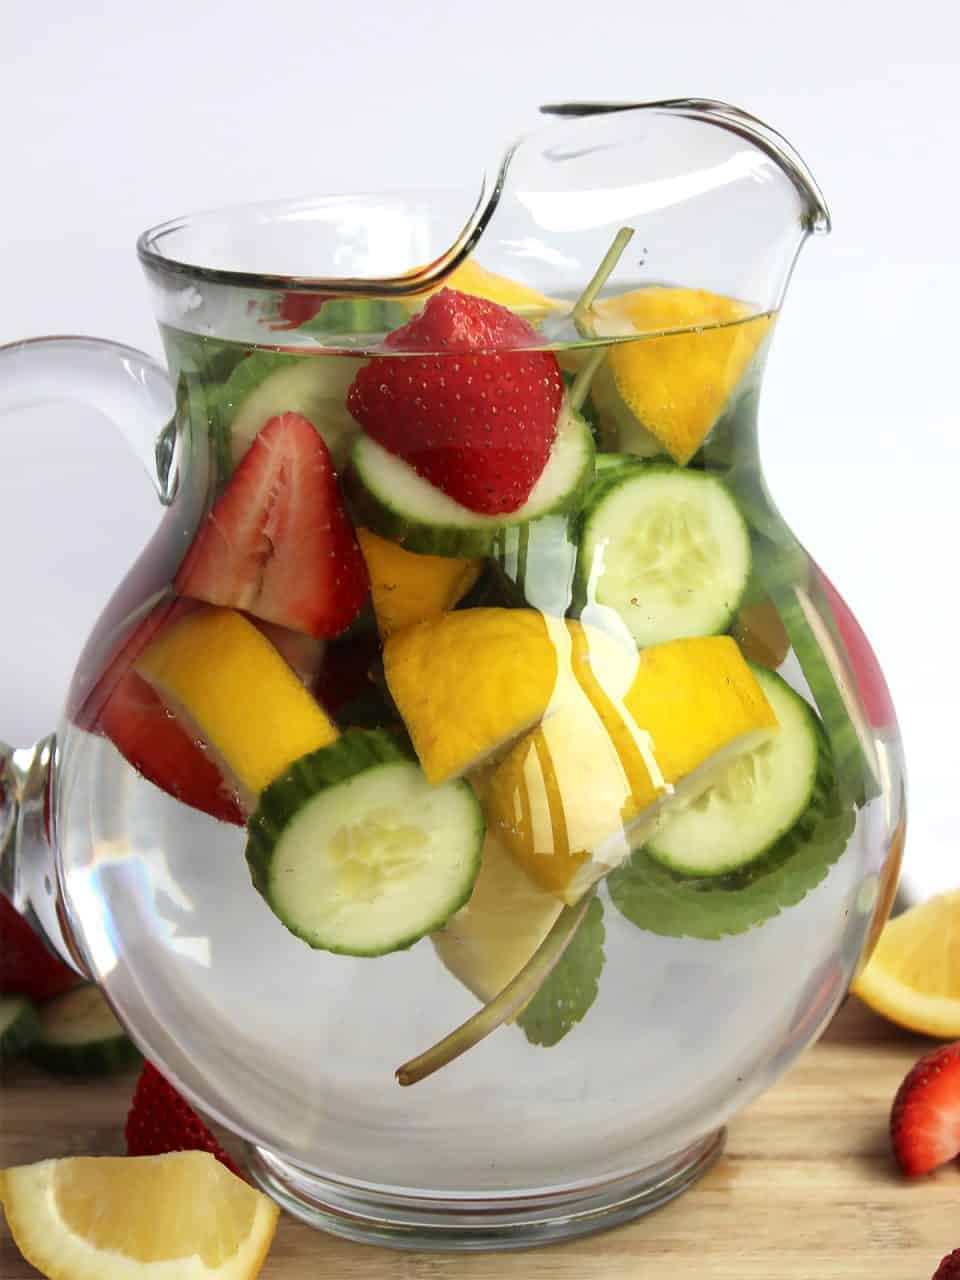 Strawberry infused water with lemon, cucumber and mint in a glass jug.